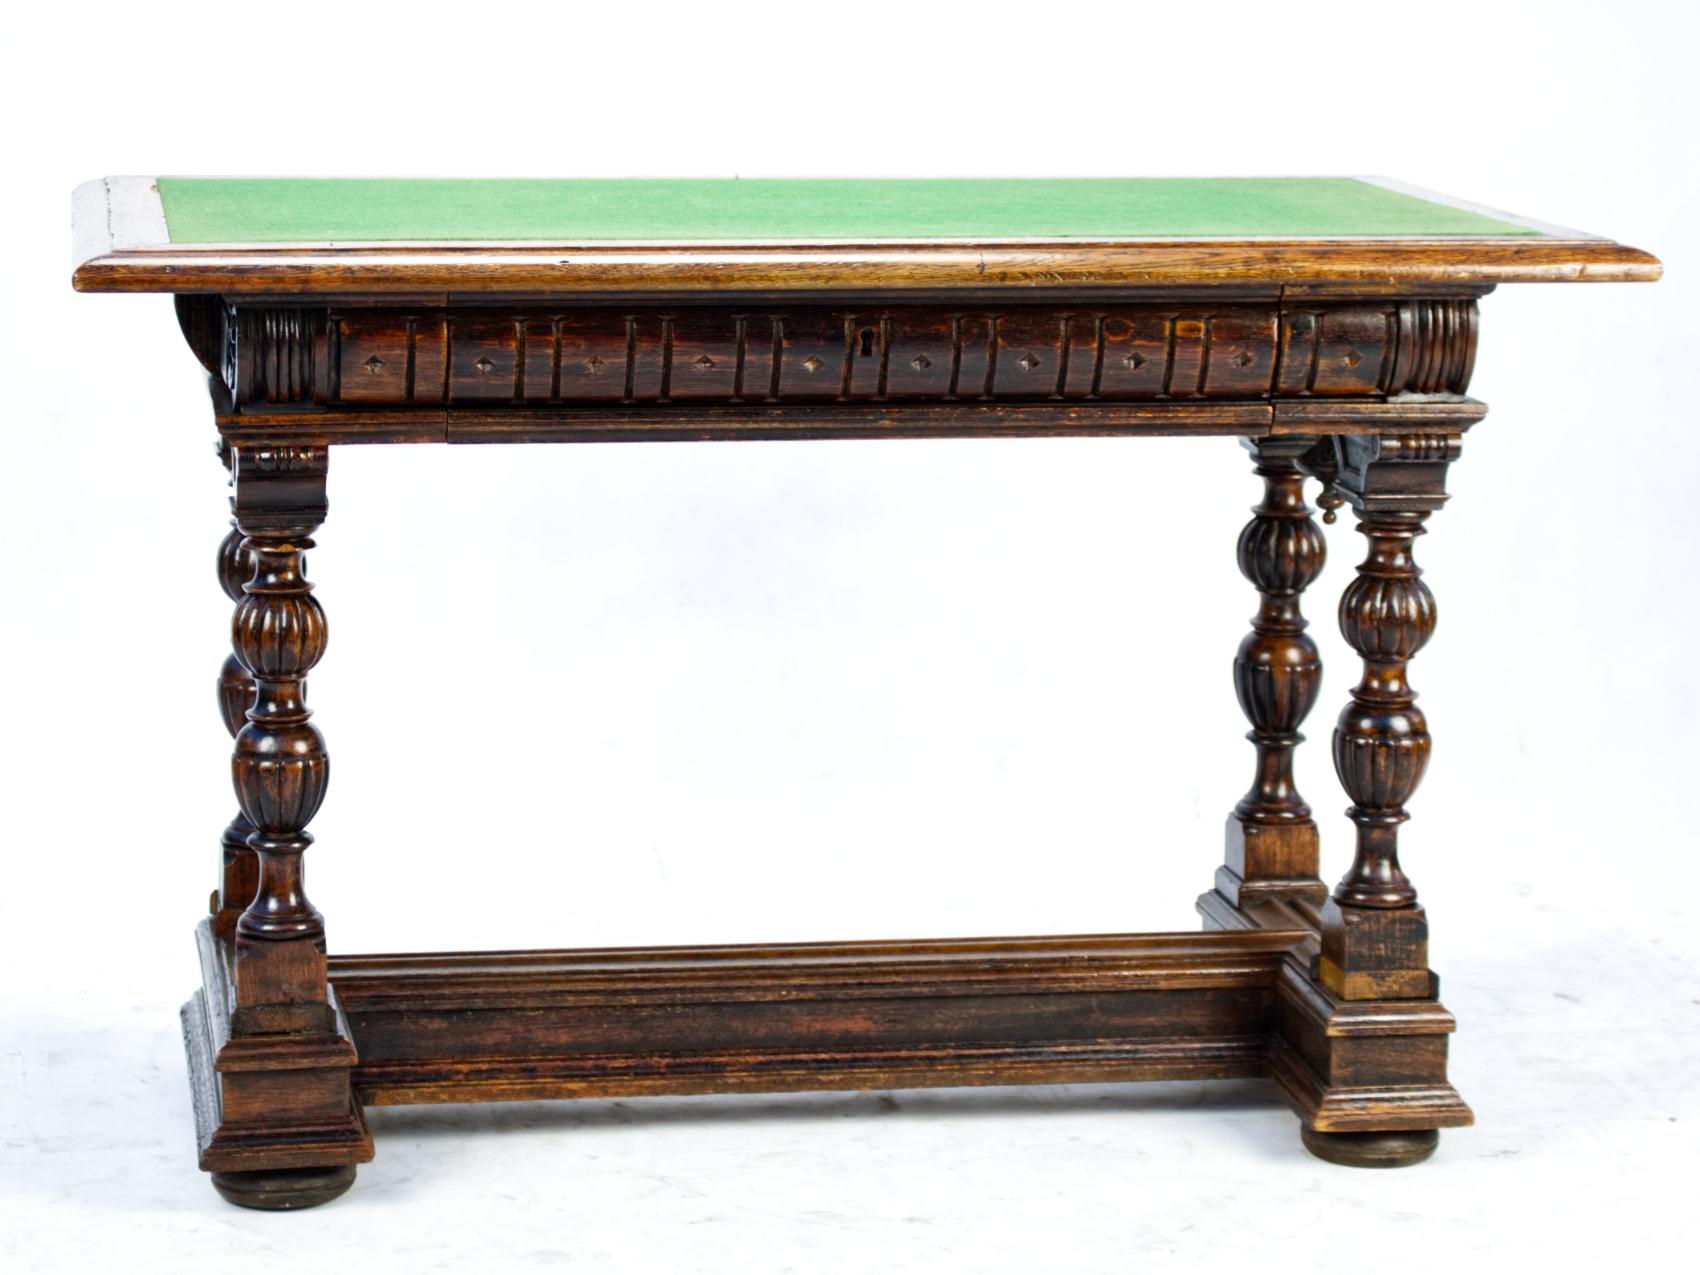 19th century hand carved small desk in original condition, can be used as a console table. Very stabile.